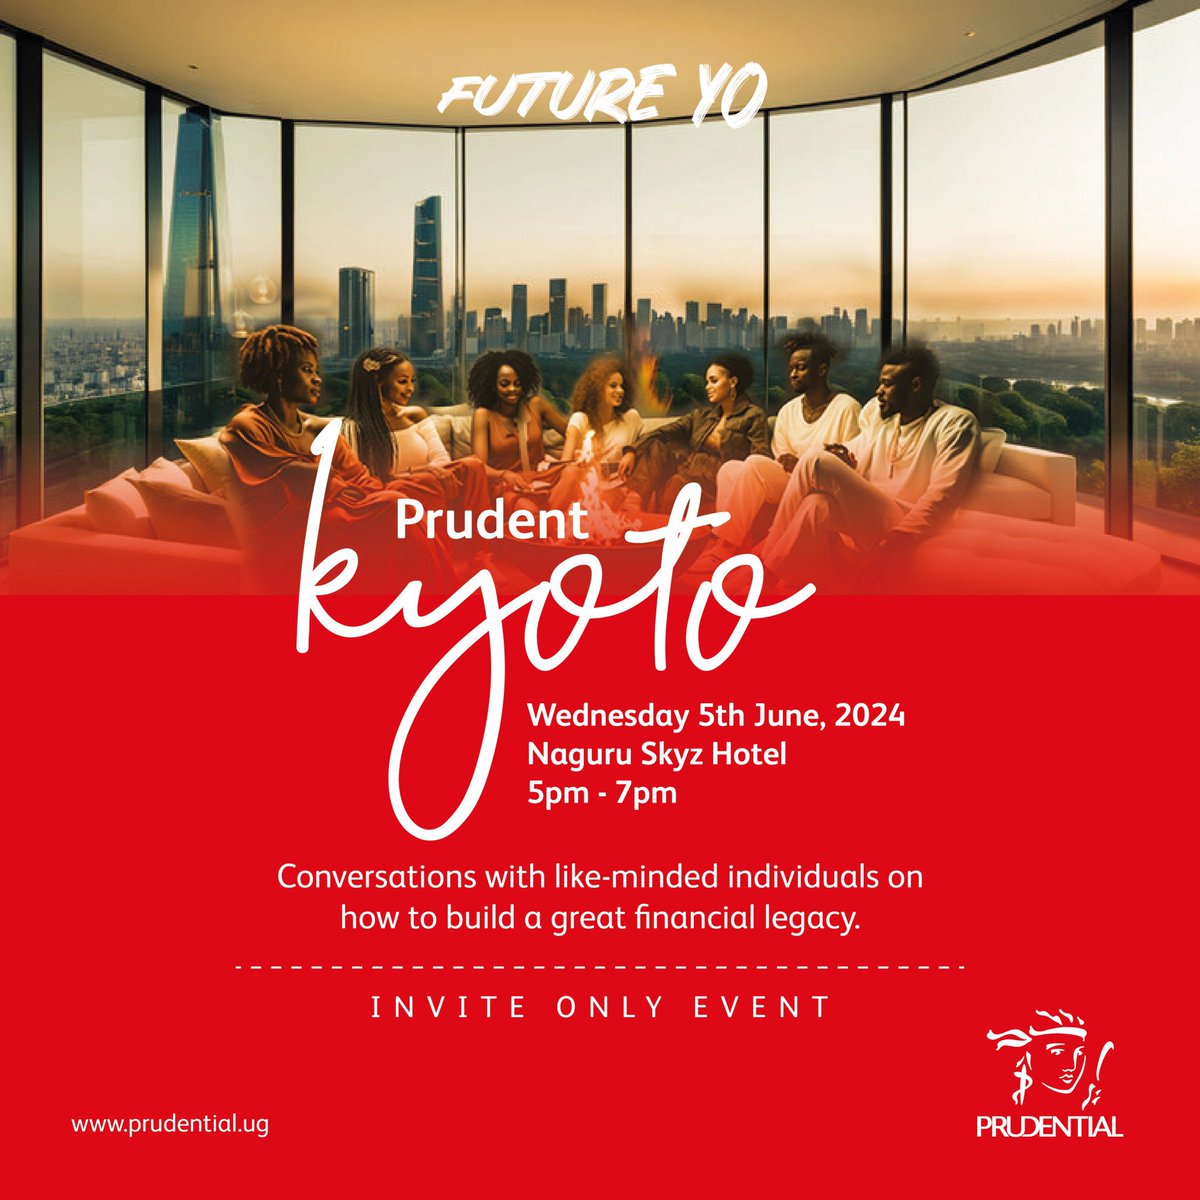 The Prudent Kyoto is currently happening. Meaningful and timely conversations with individuals focused on financial growth are under-way👏🔥 #FutureYo